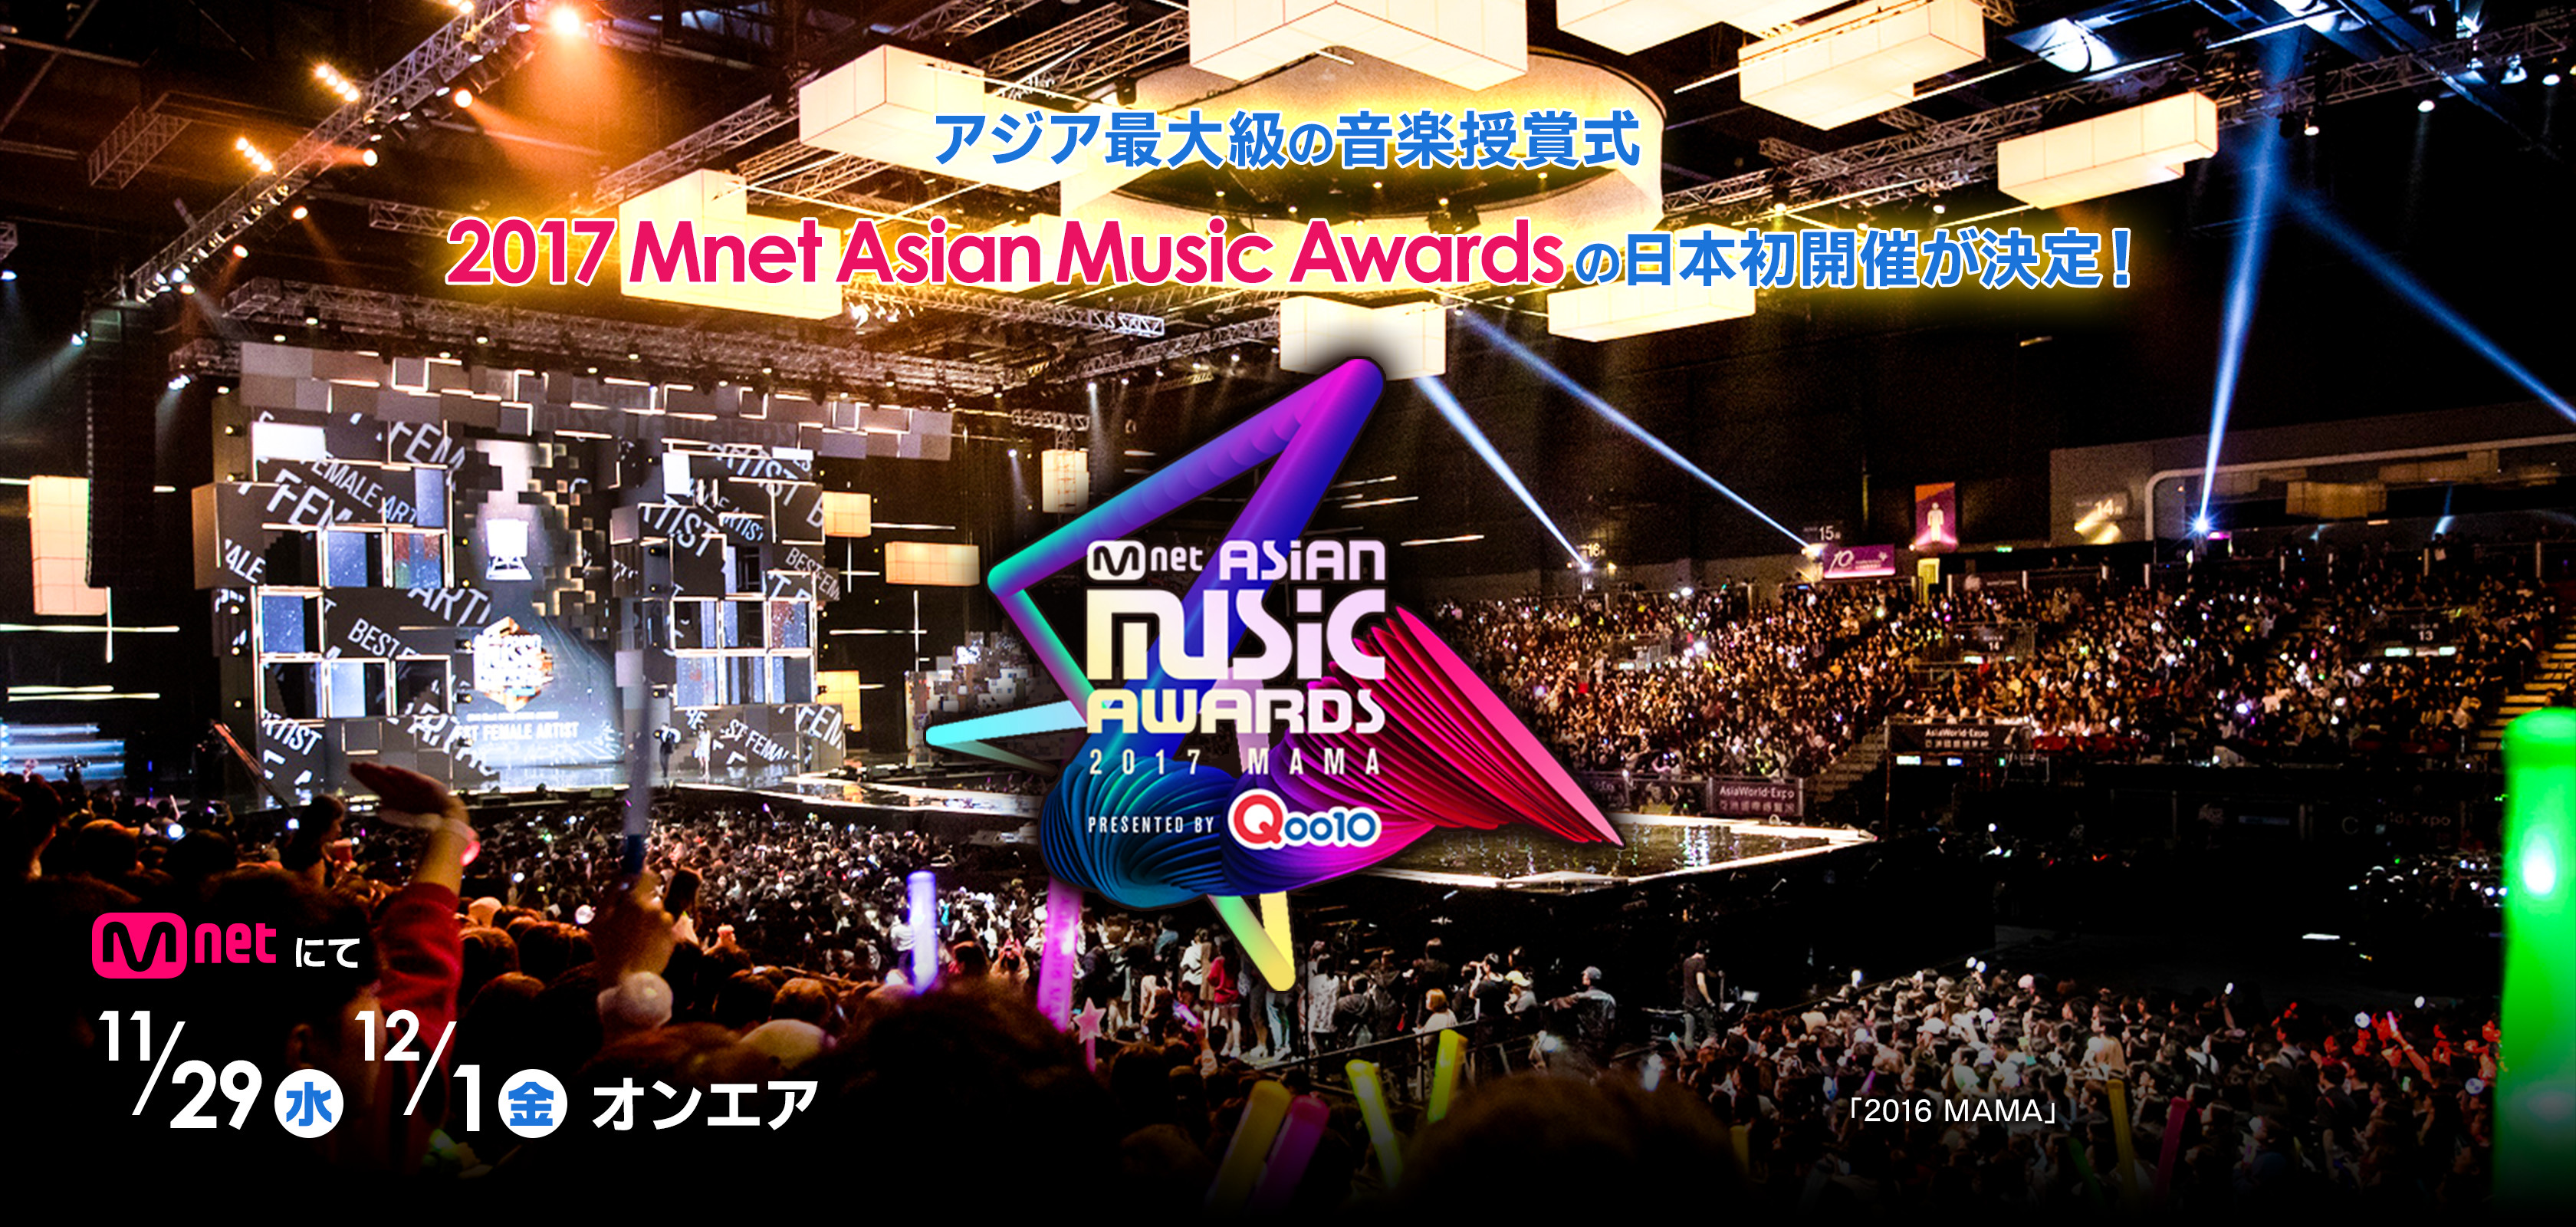 Mnet Asian Music Awards 2017 Presented by Qoo10 MAMA アジア最大級の音楽授賞式 2017 Mnet Asian Music Awardsの日本初開催が決定！ Mnetにて11/29（水）12/1（金）オンエア 「2016 MAMA」 ©CJ E&M Corporation, all rights reserved